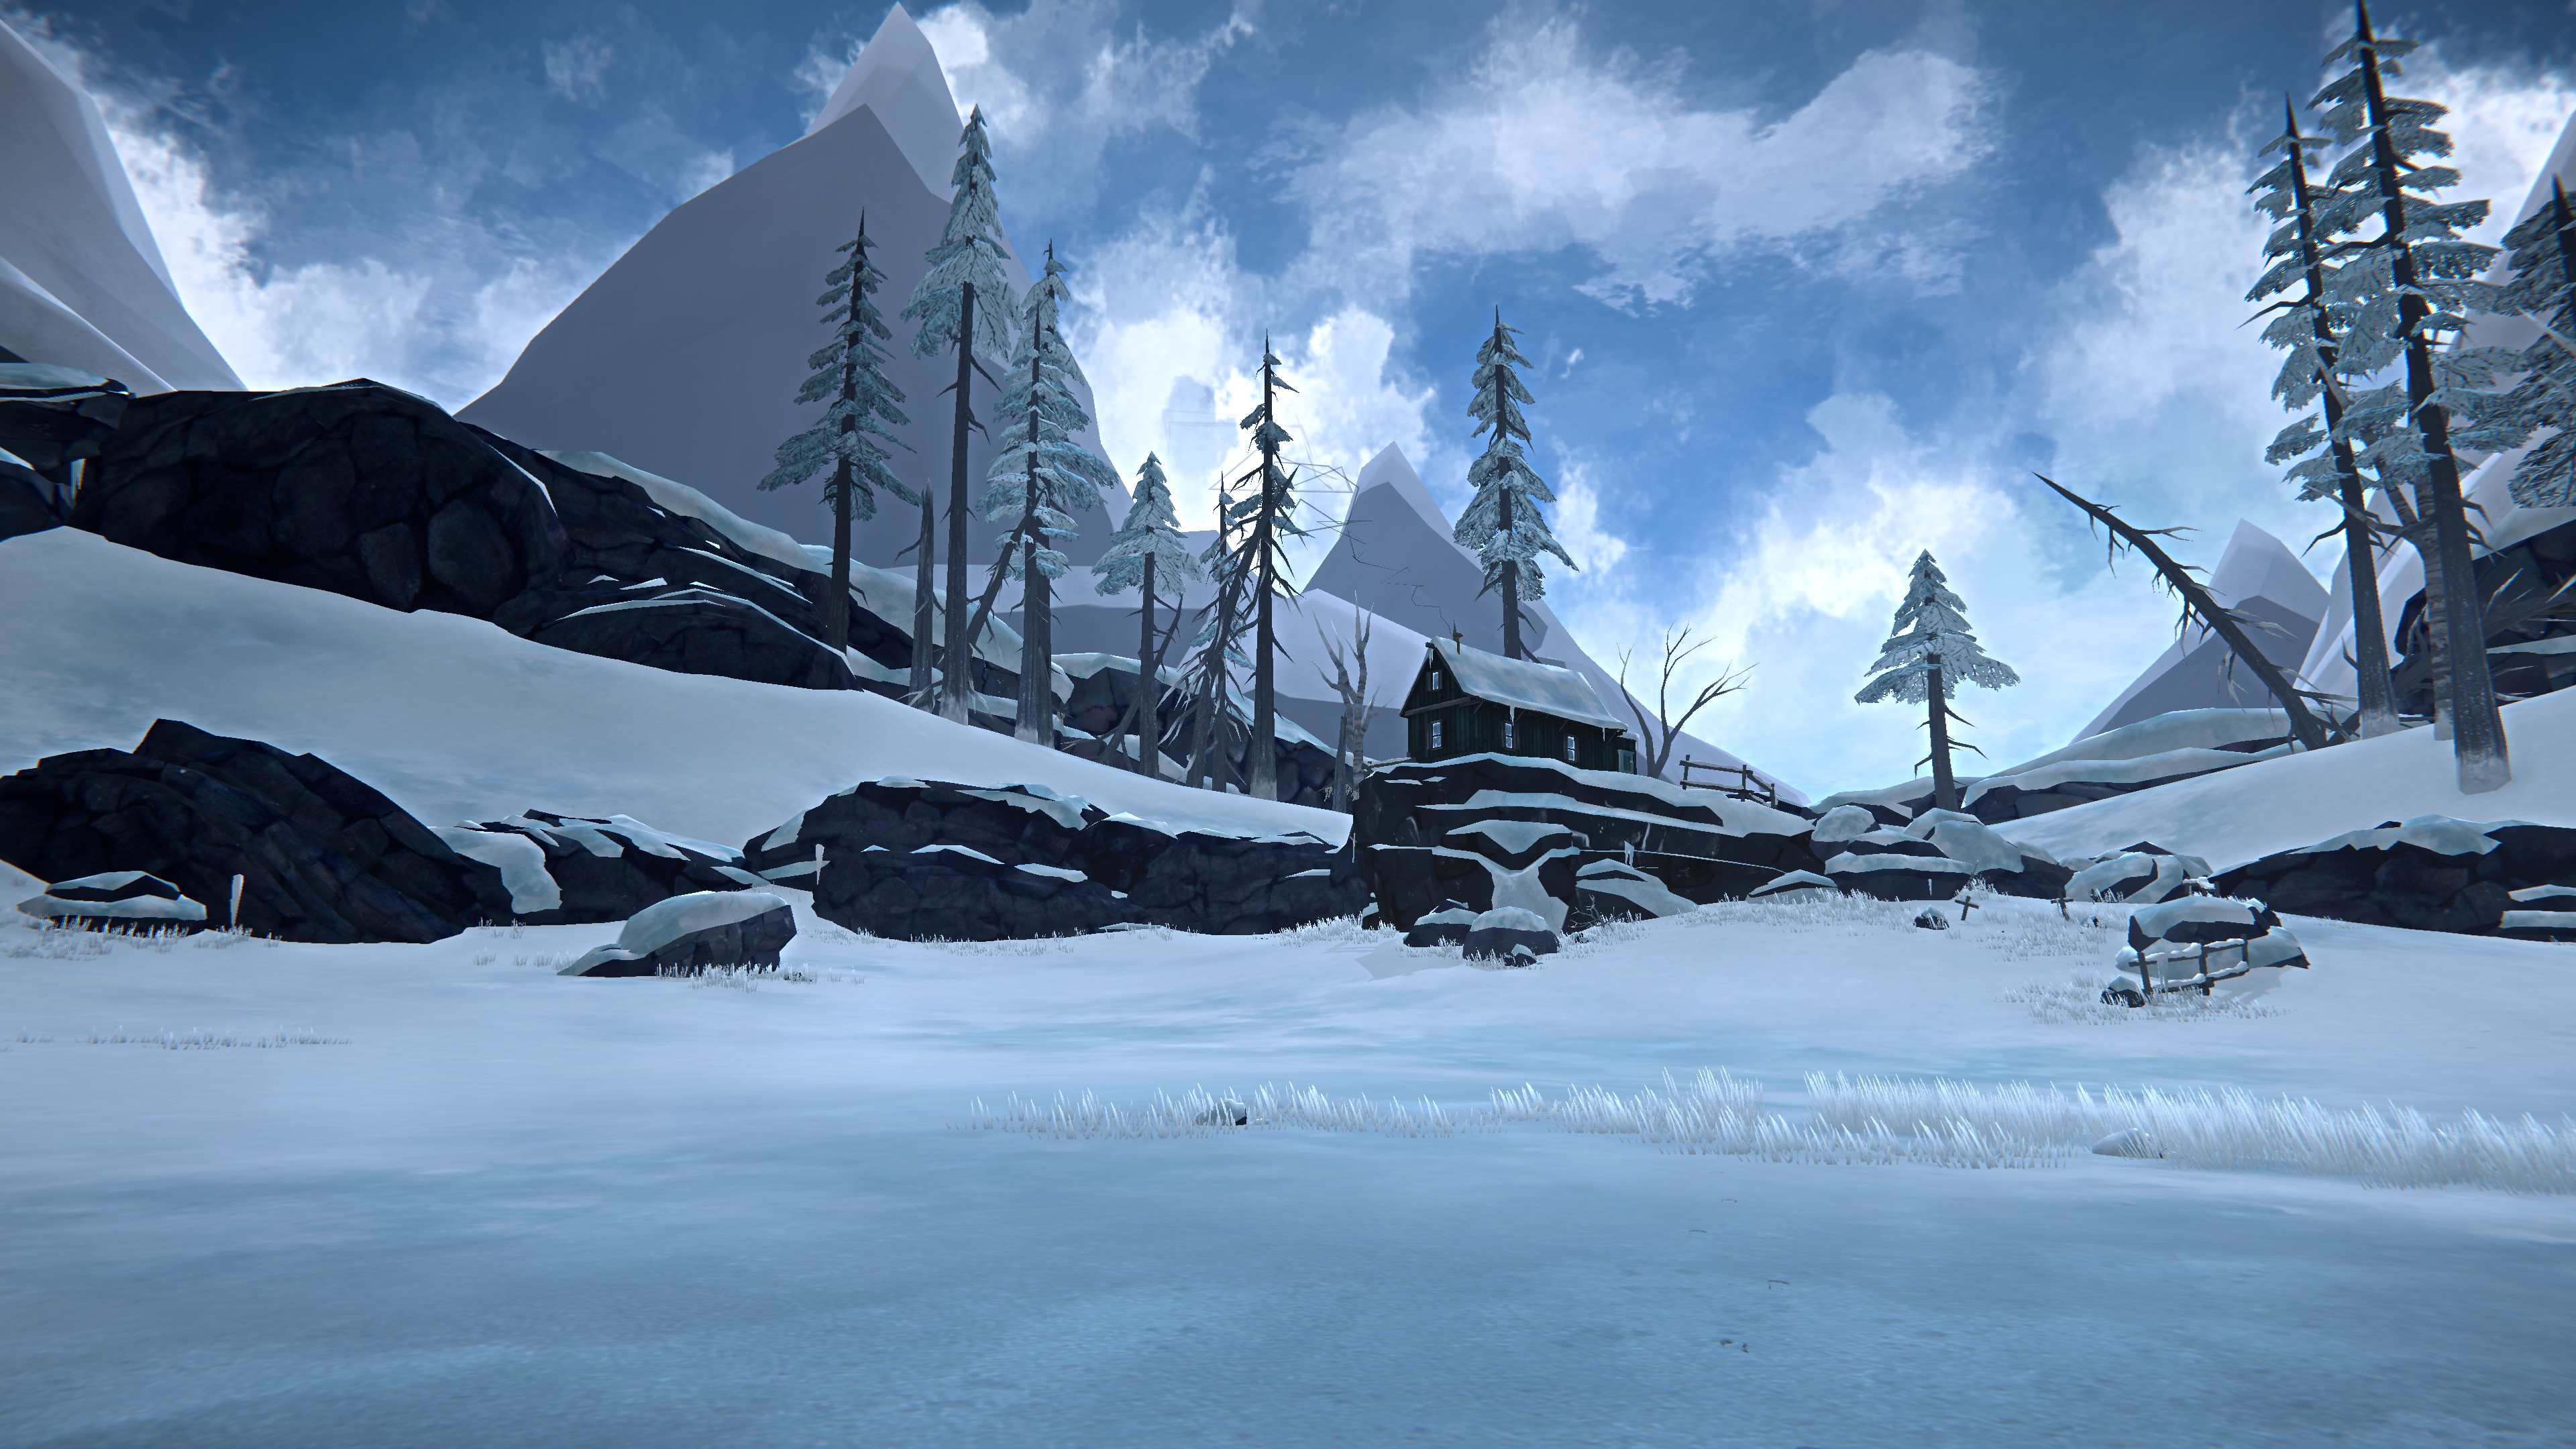 Video Game Landscape Video Games Screen Shot The Long Dark Snow PC Gaming Survival Nature Video Game 3840x2160